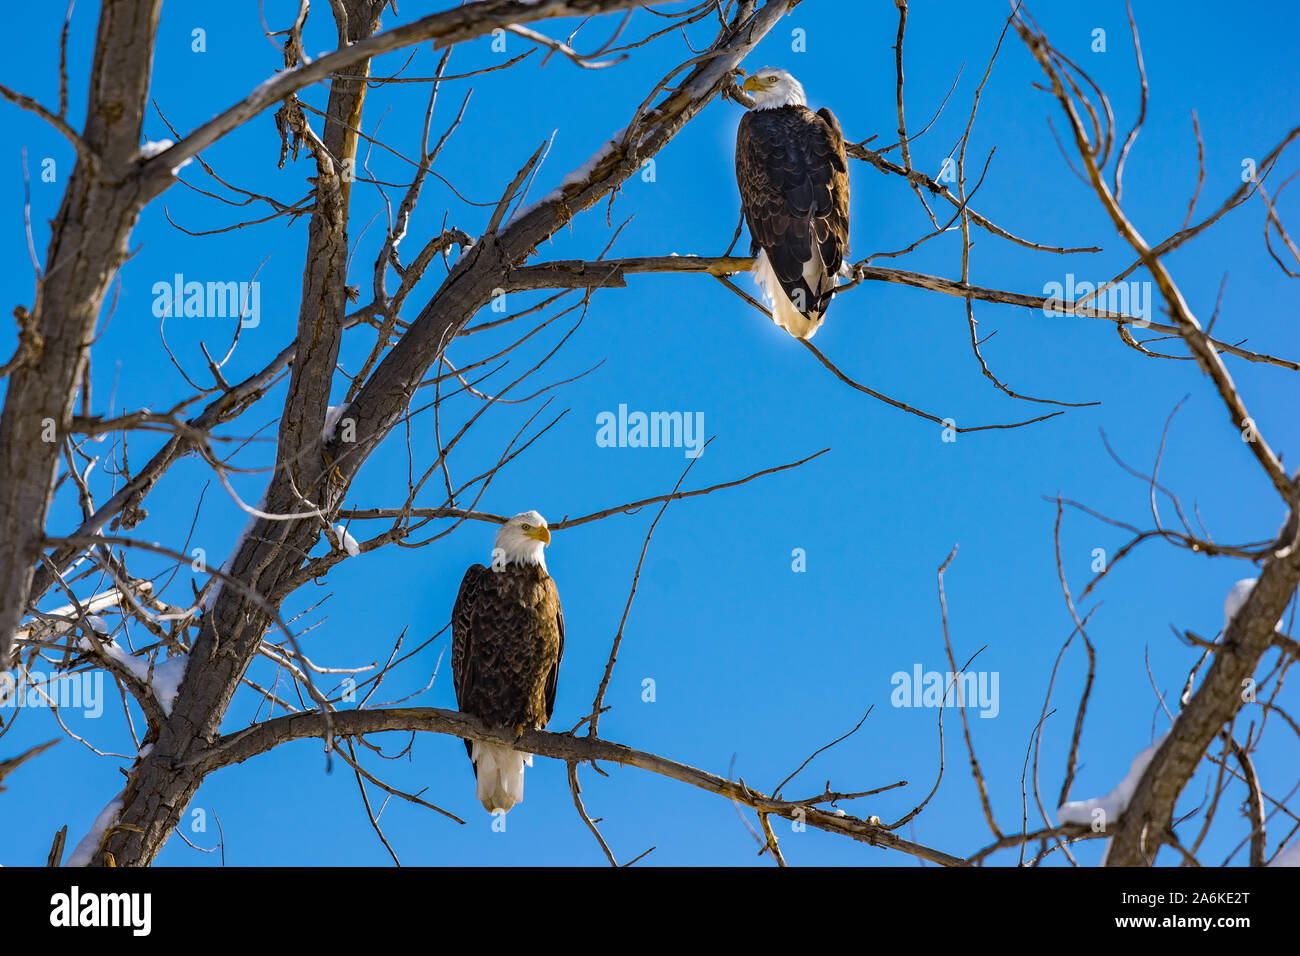 A Majestic Bald Eagle Pair Perched in a Tree Stock Photo